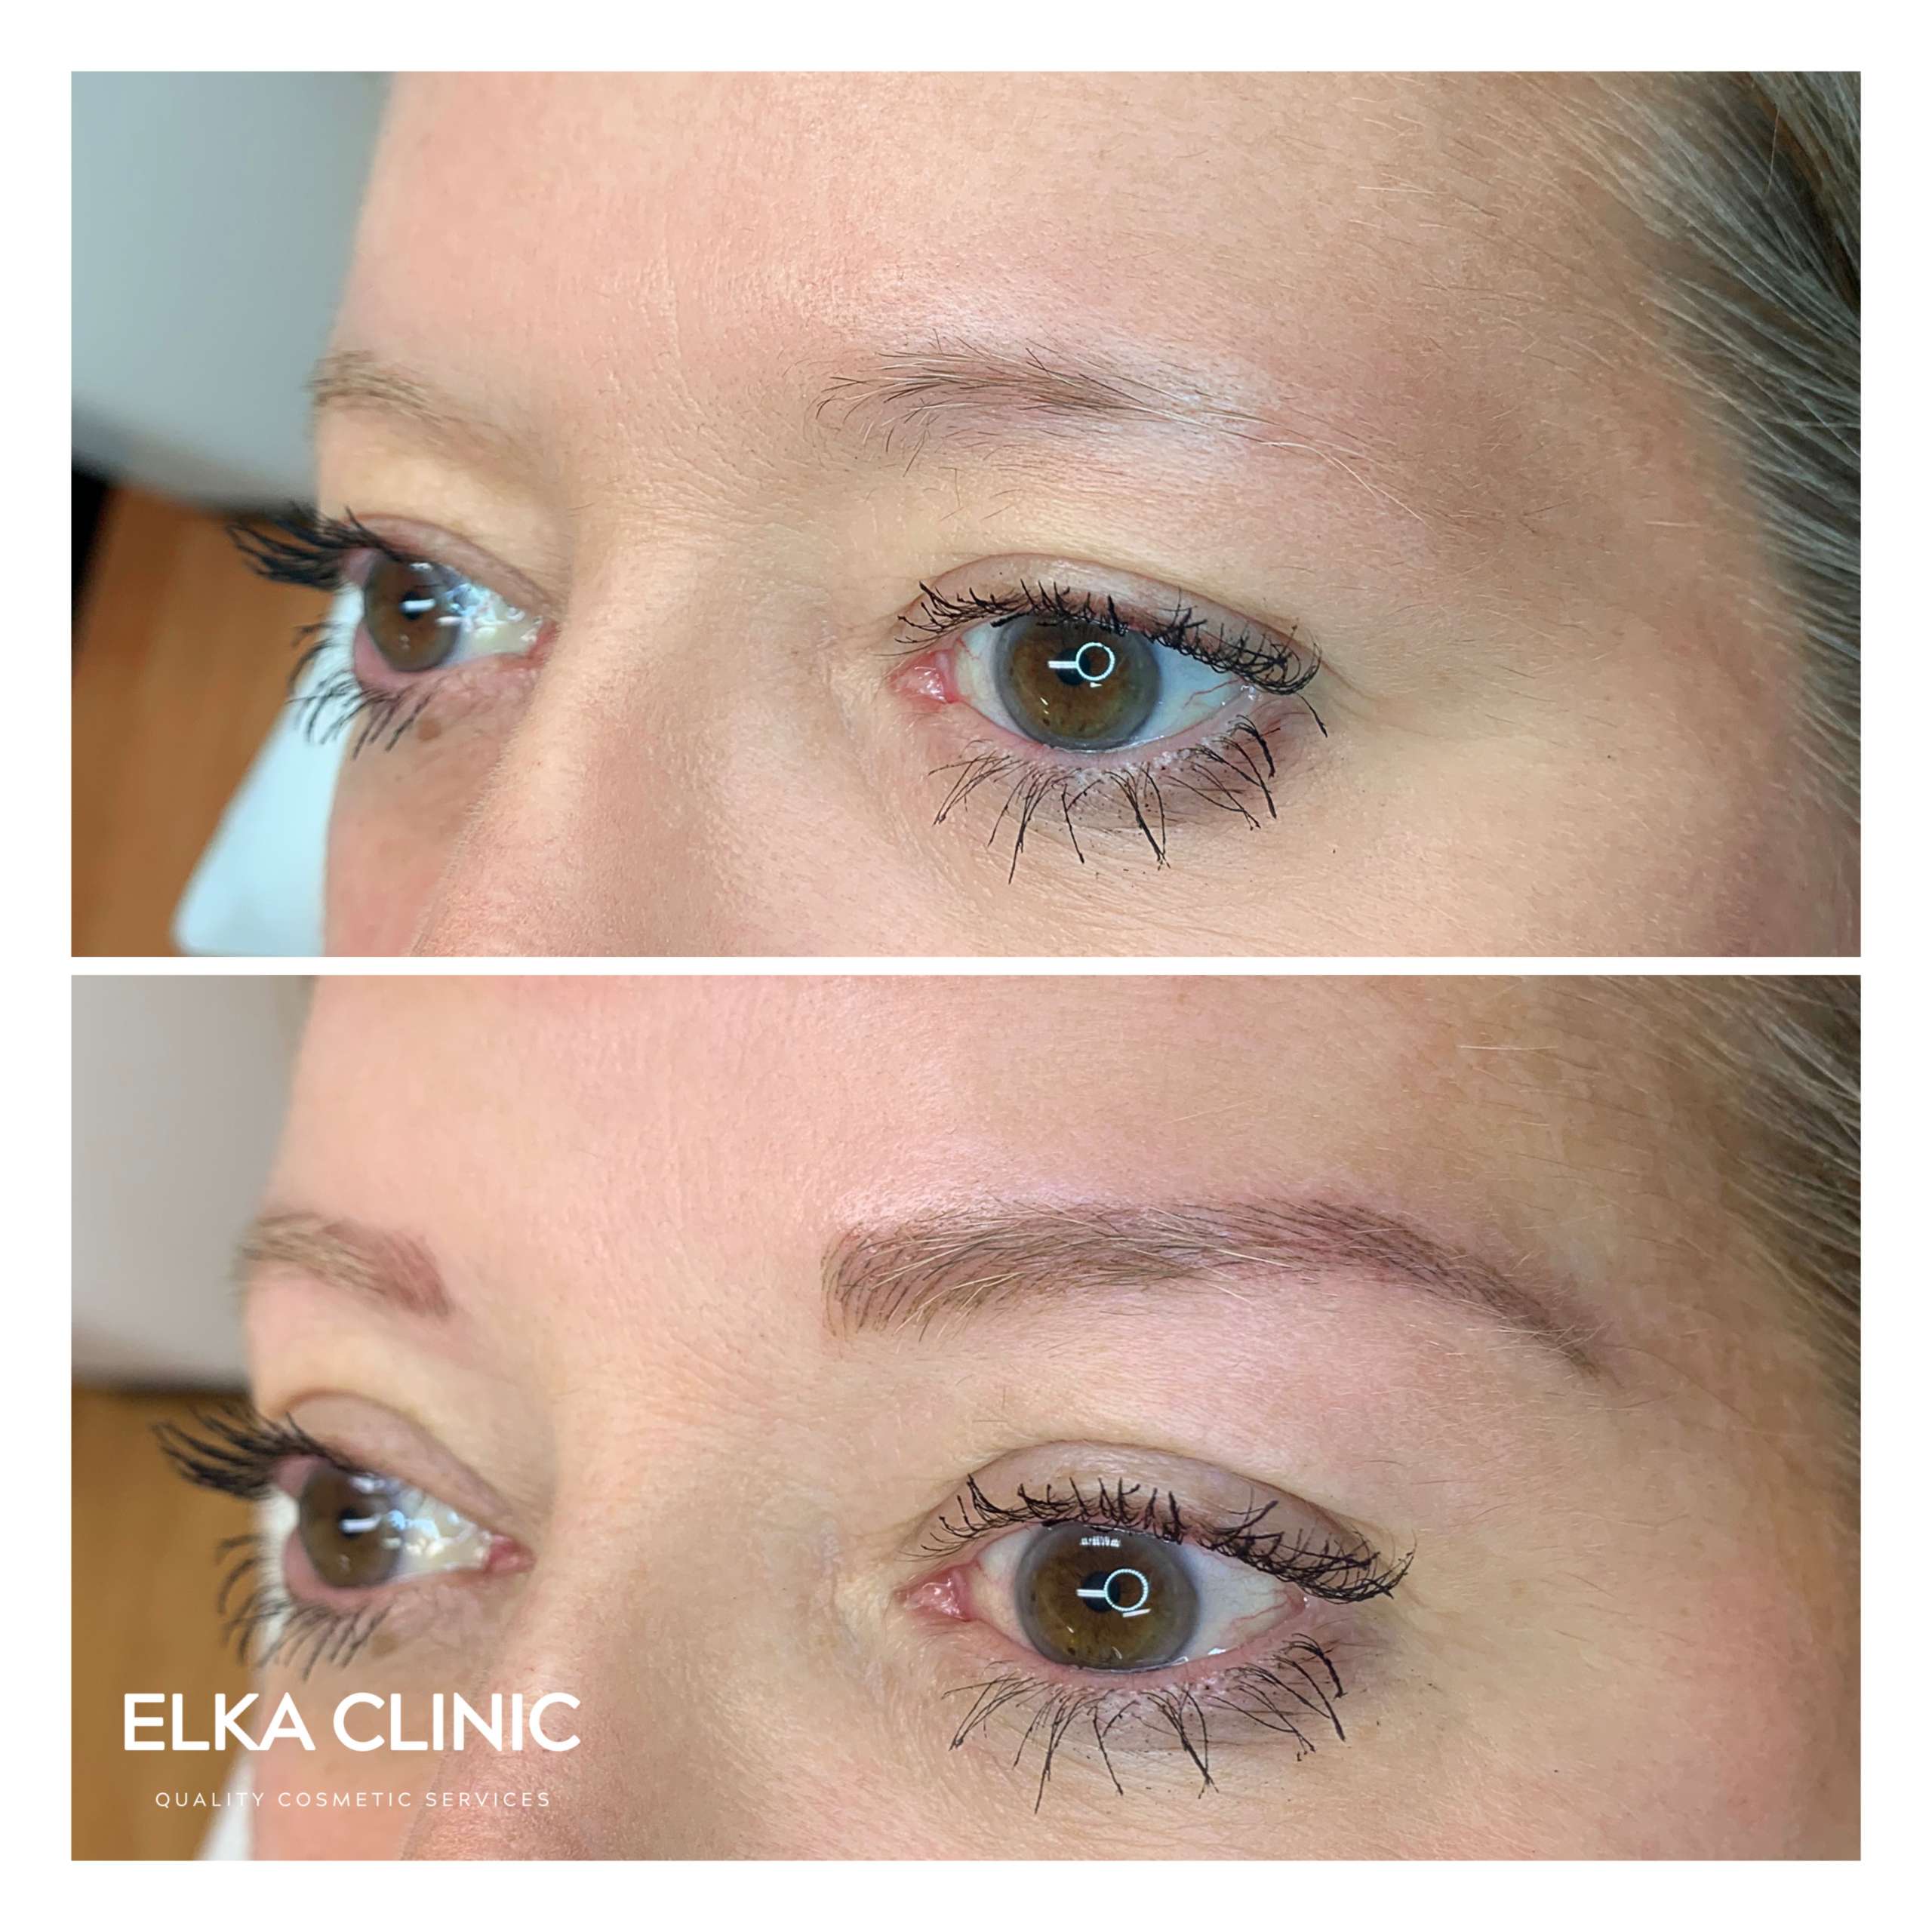 Eyebrow Lifting and changing the shape by ELKA CLINIC